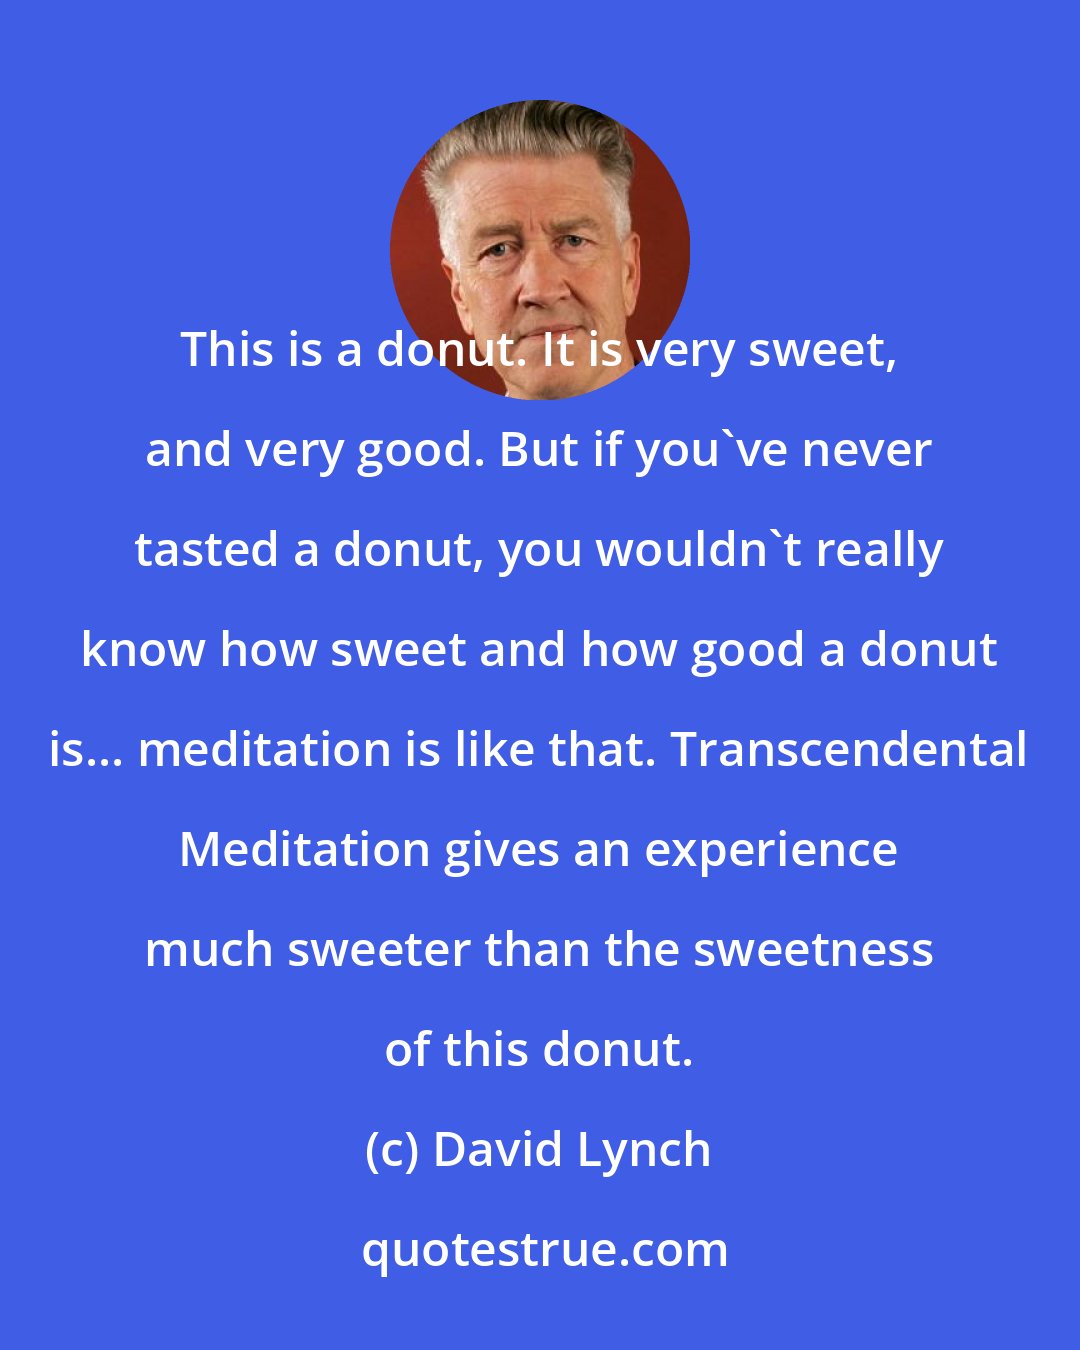 David Lynch: This is a donut. It is very sweet, and very good. But if you've never tasted a donut, you wouldn't really know how sweet and how good a donut is... meditation is like that. Transcendental Meditation gives an experience much sweeter than the sweetness of this donut.